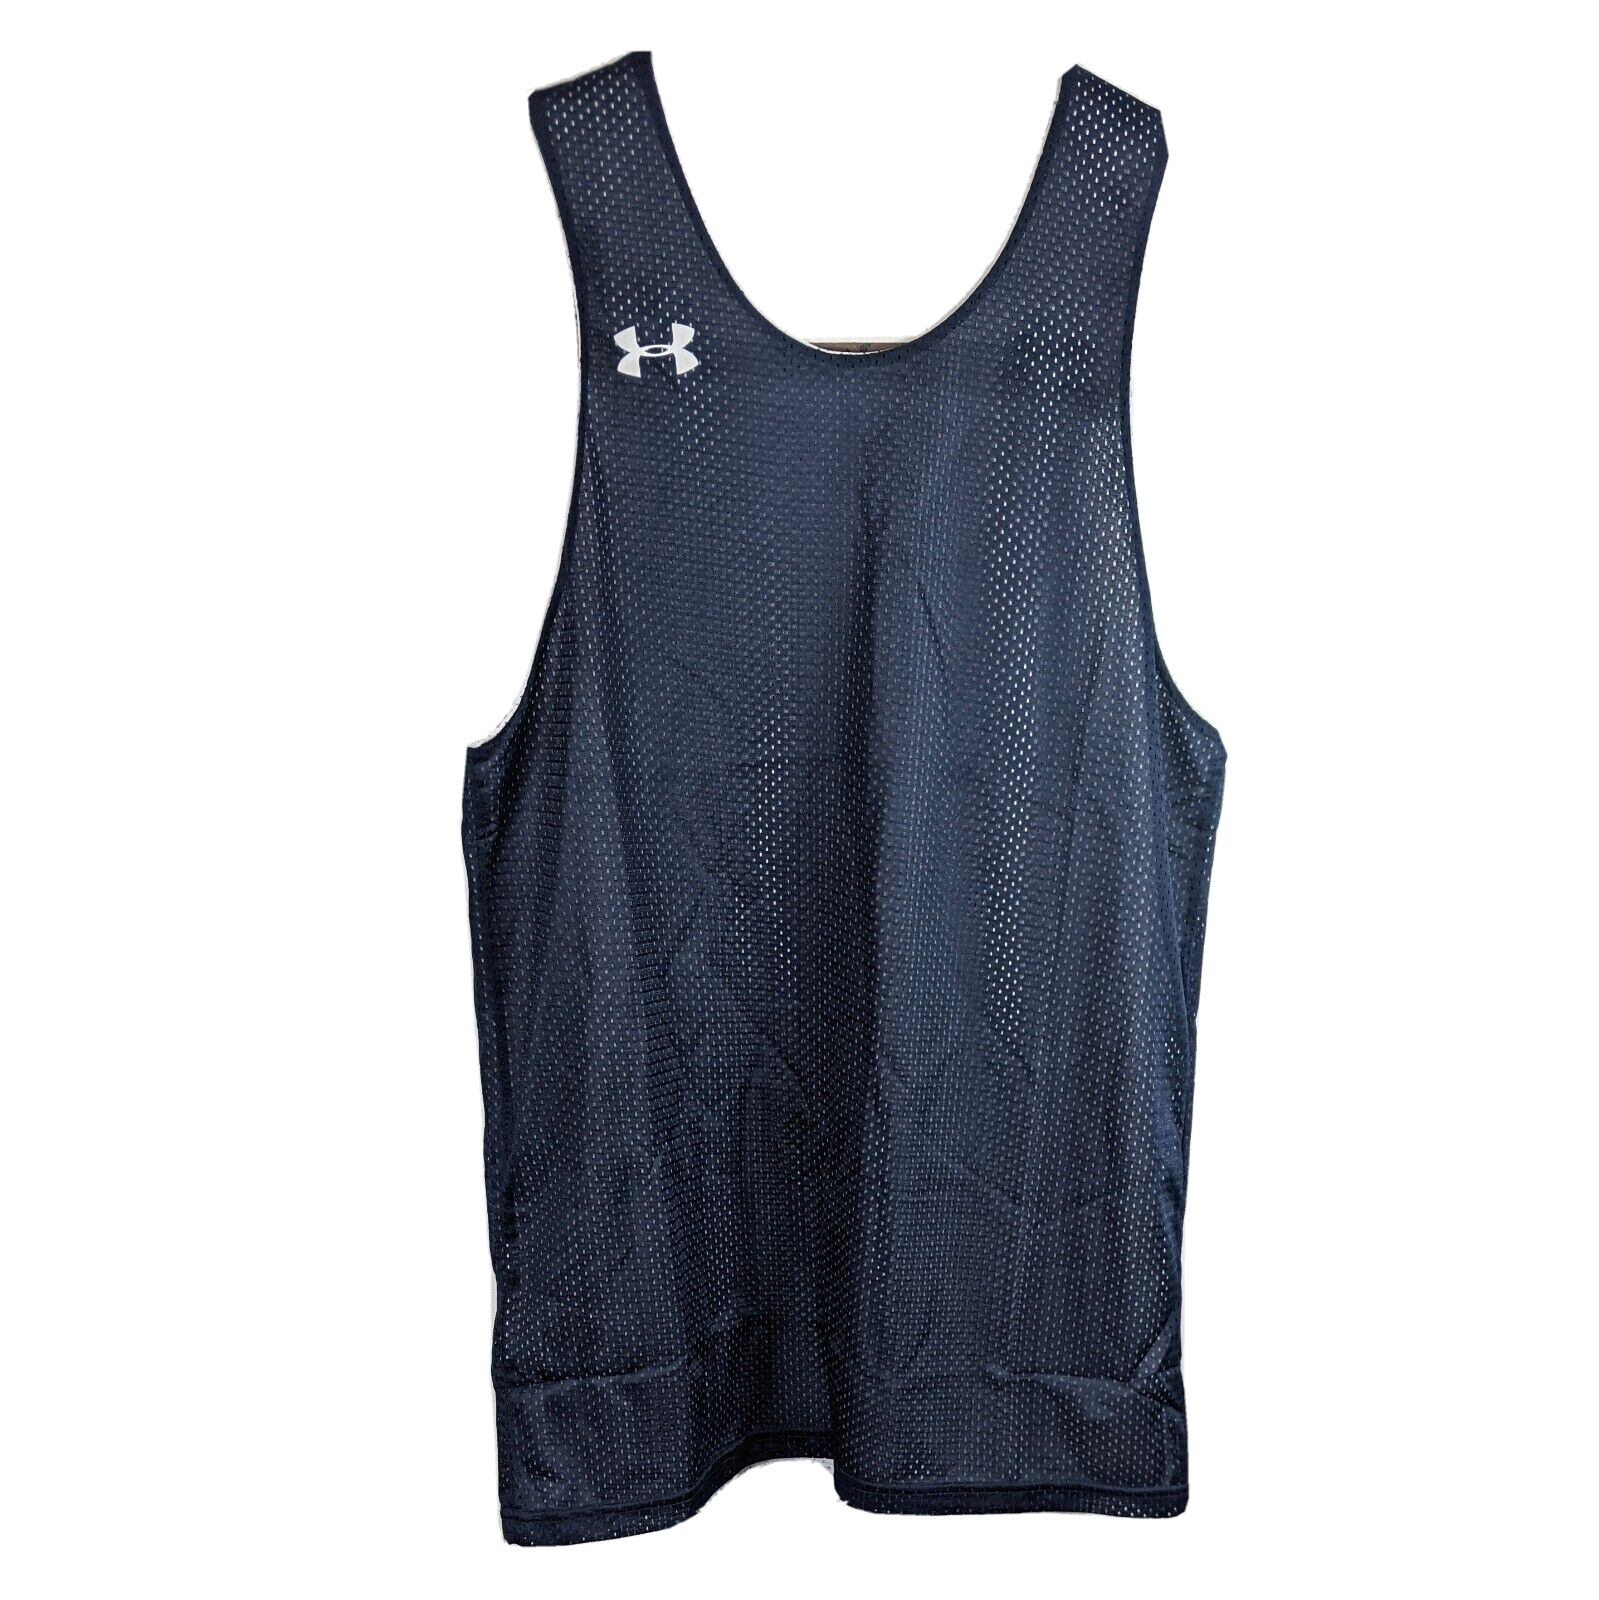 Kids Reversible Basketball Jersey Large (Under Armour) Navy Blue with White - $16.76